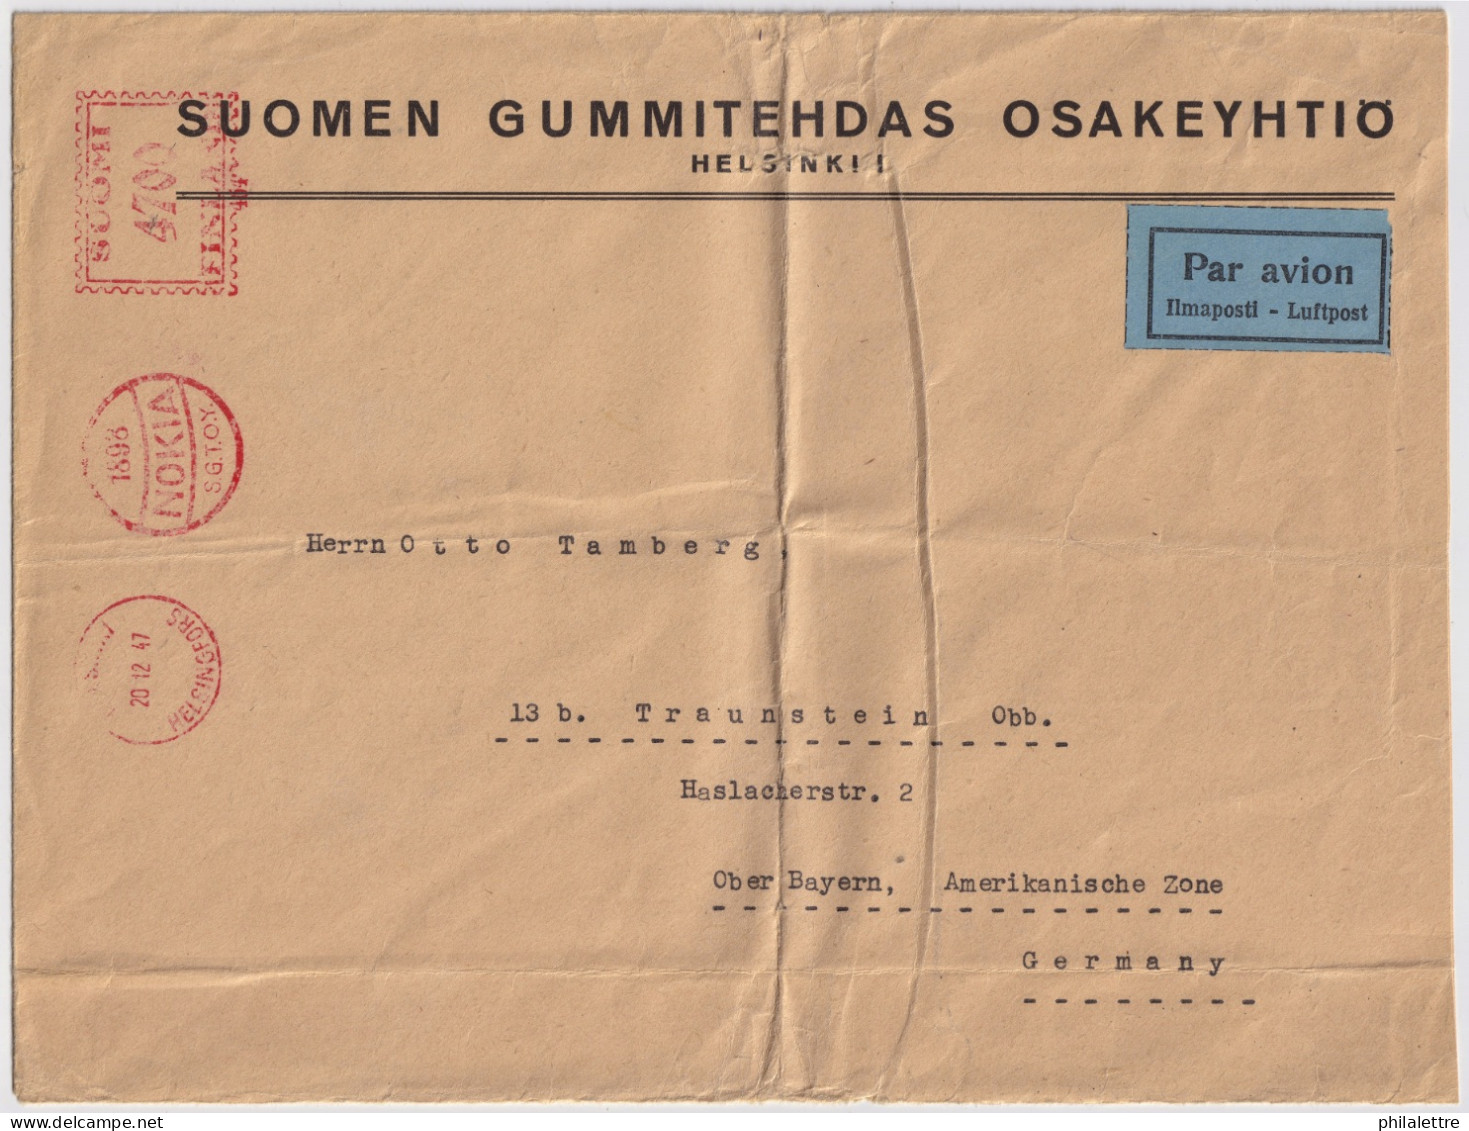 FINLAND - 1947 - "1898 / NOKIA / S.G..O.Y." Franking Mark (4700p) On Air Mail Cover To Germany - Covers & Documents